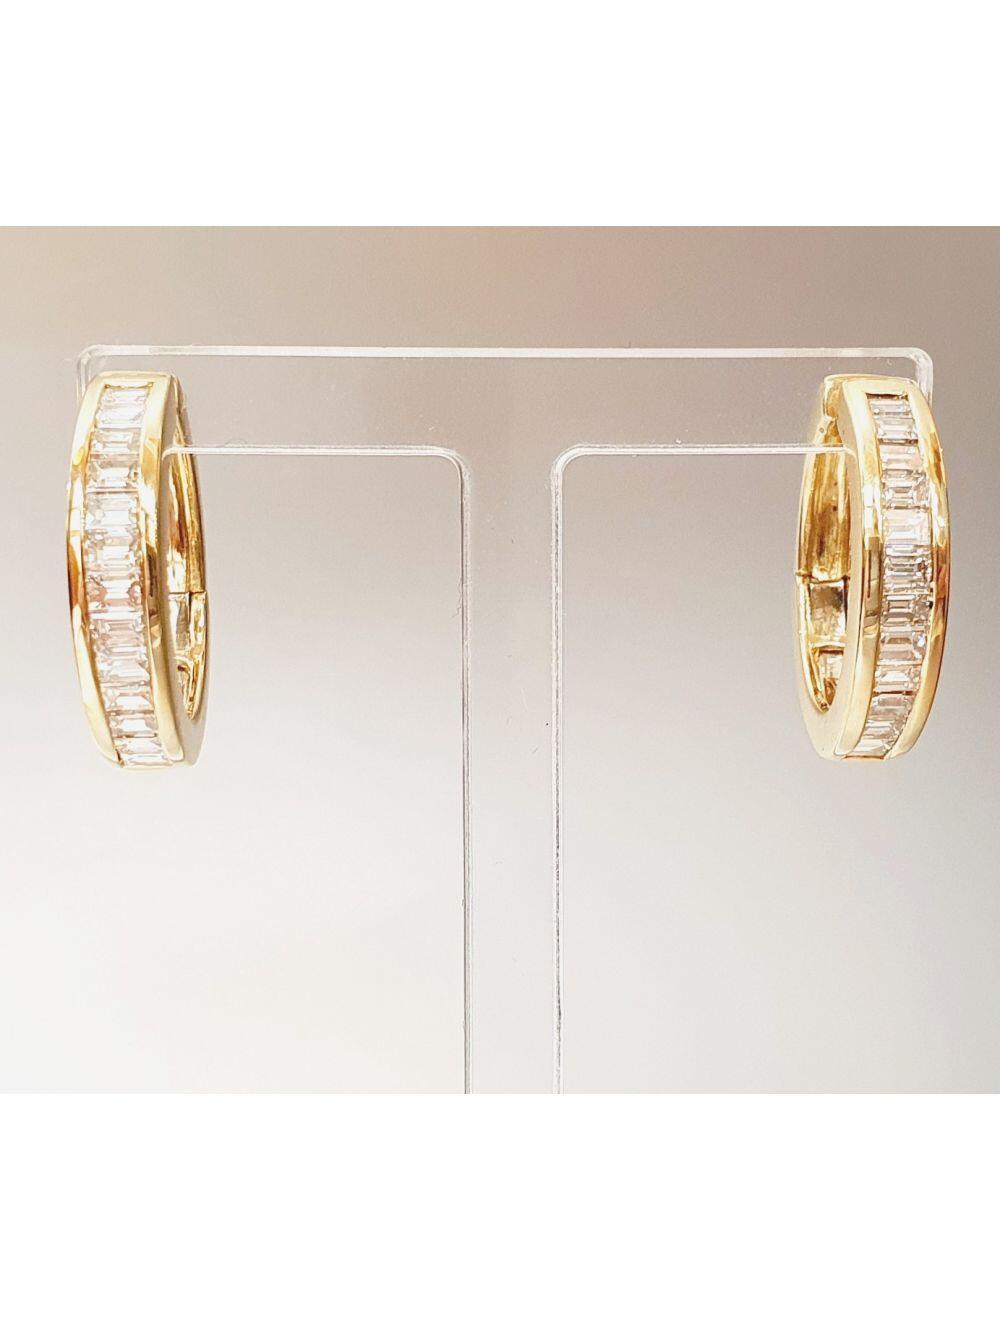 # 1.5cm Creole earrings in 18K yellow gold with 1.17ct F VS1 baguette-cut natural diamonds